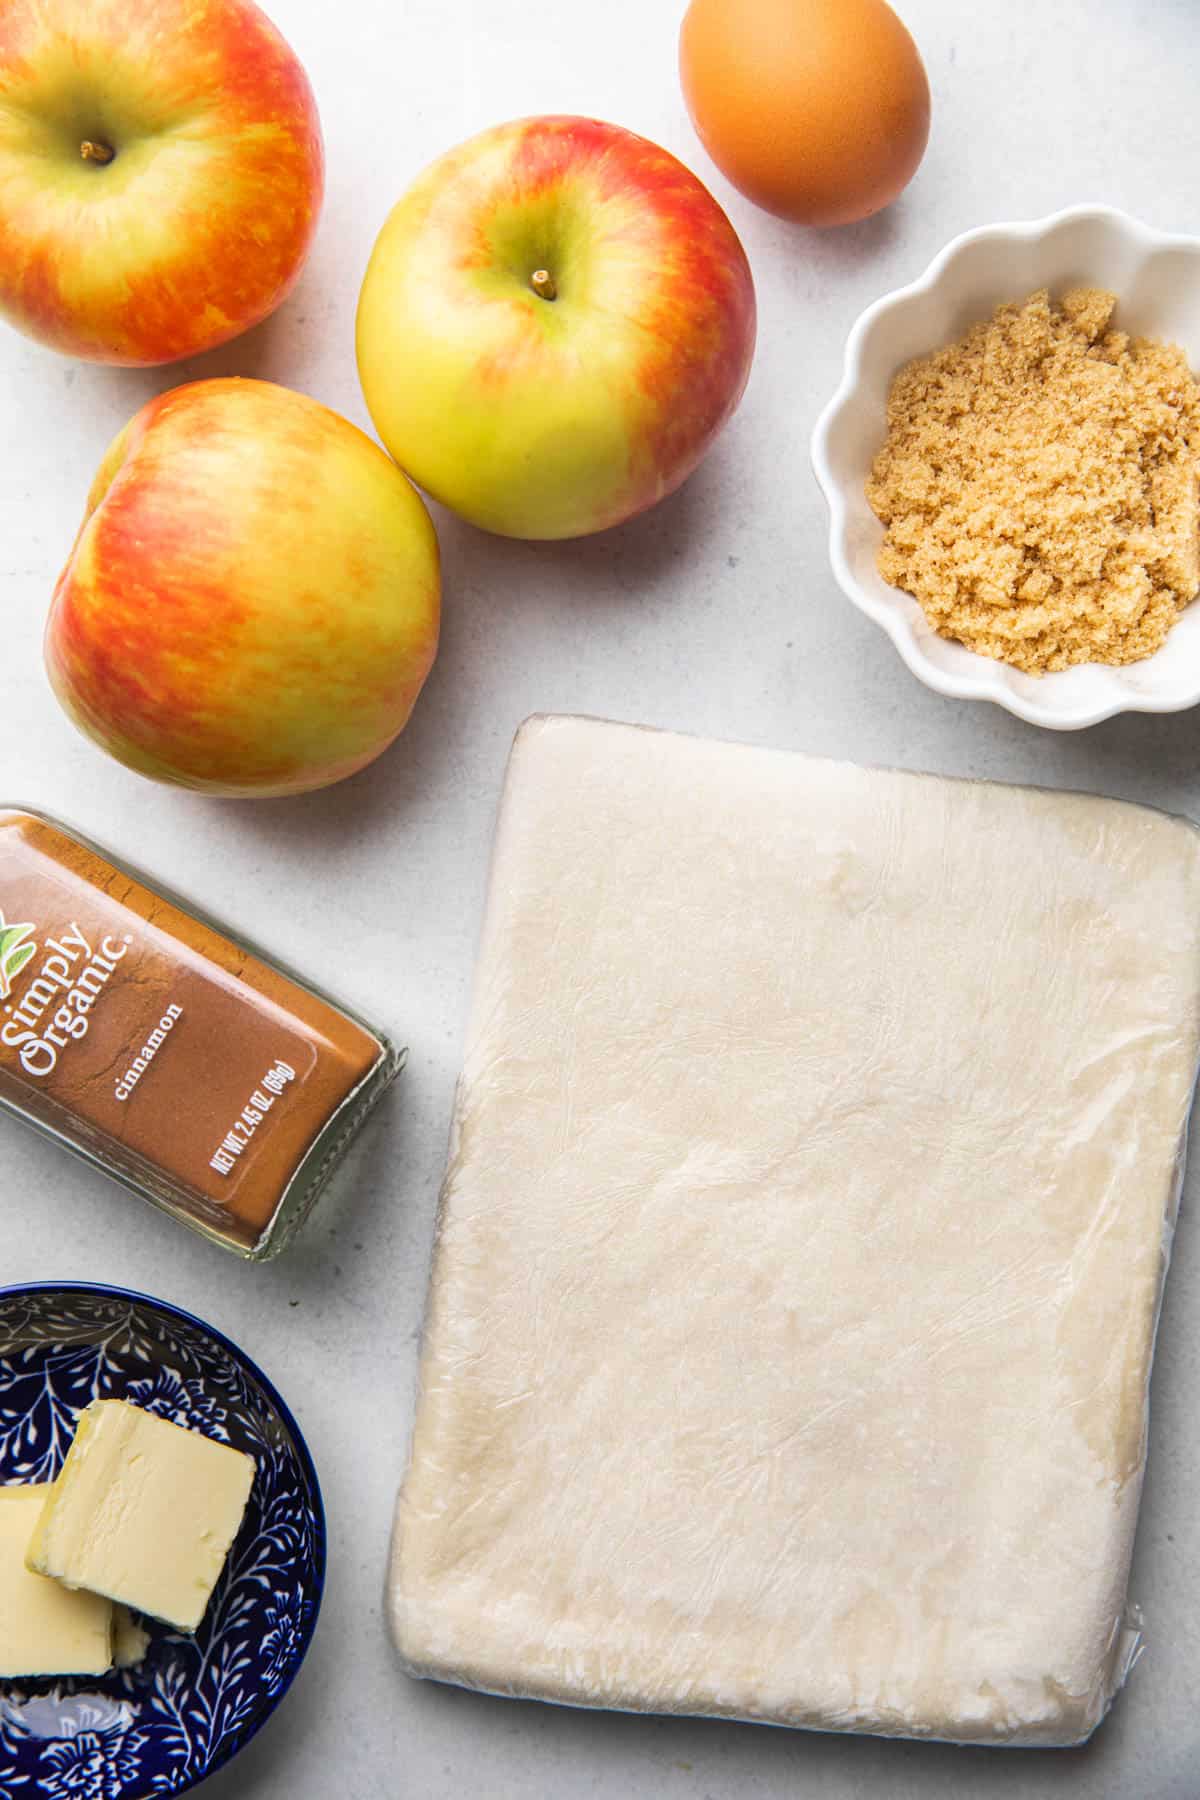 Ingredients for Apple Pie with Puff Pastry.